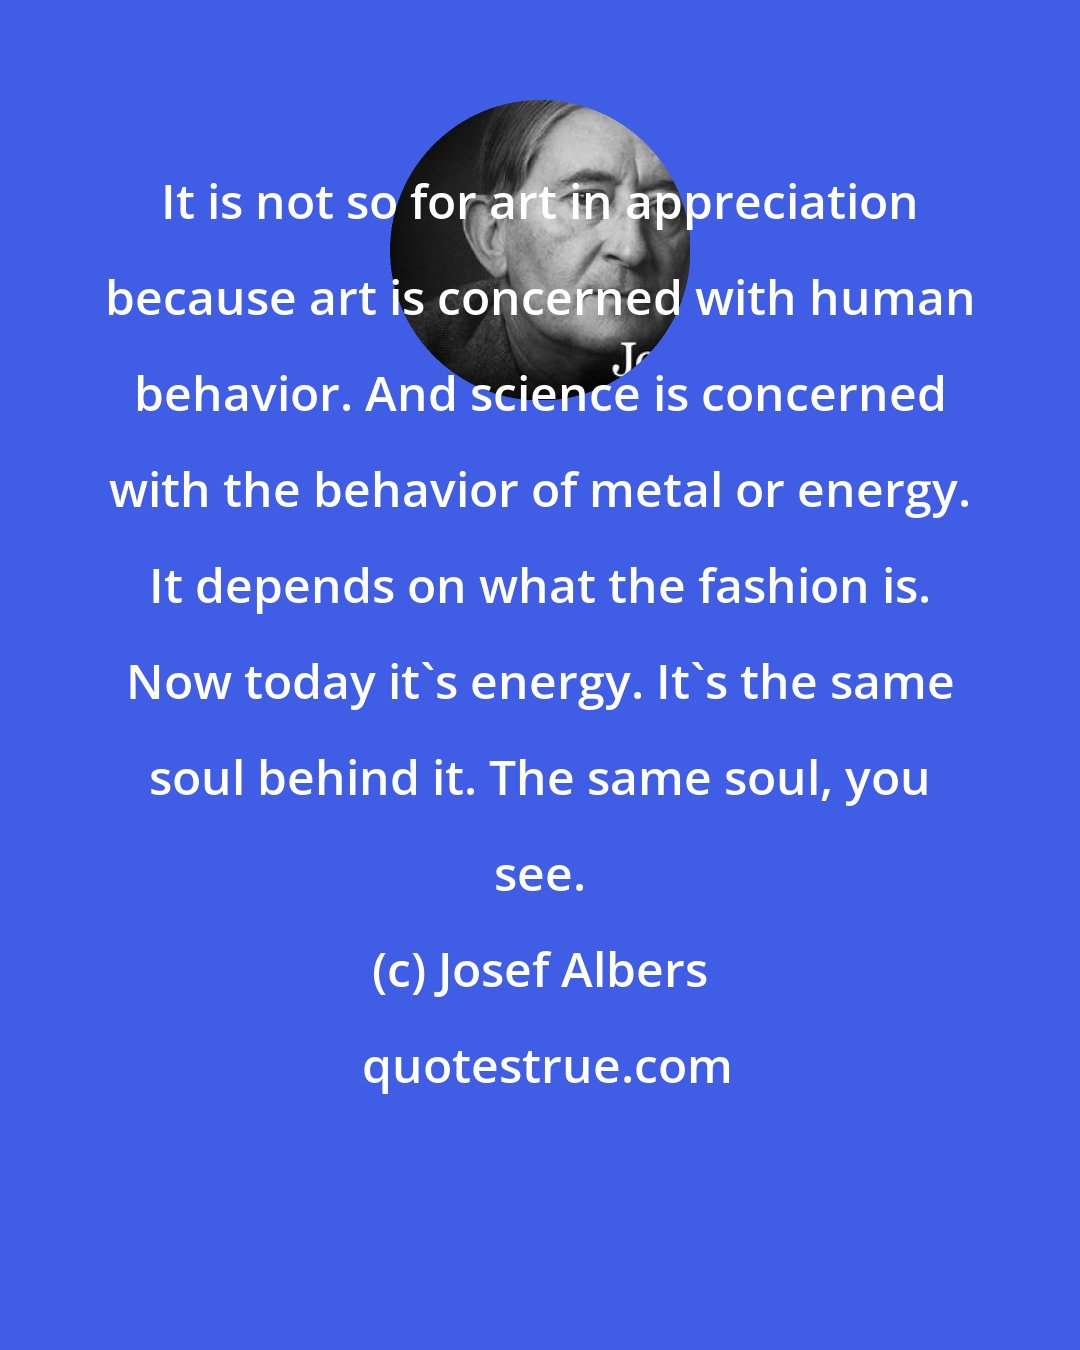 Josef Albers: It is not so for art in appreciation because art is concerned with human behavior. And science is concerned with the behavior of metal or energy. It depends on what the fashion is. Now today it's energy. It's the same soul behind it. The same soul, you see.